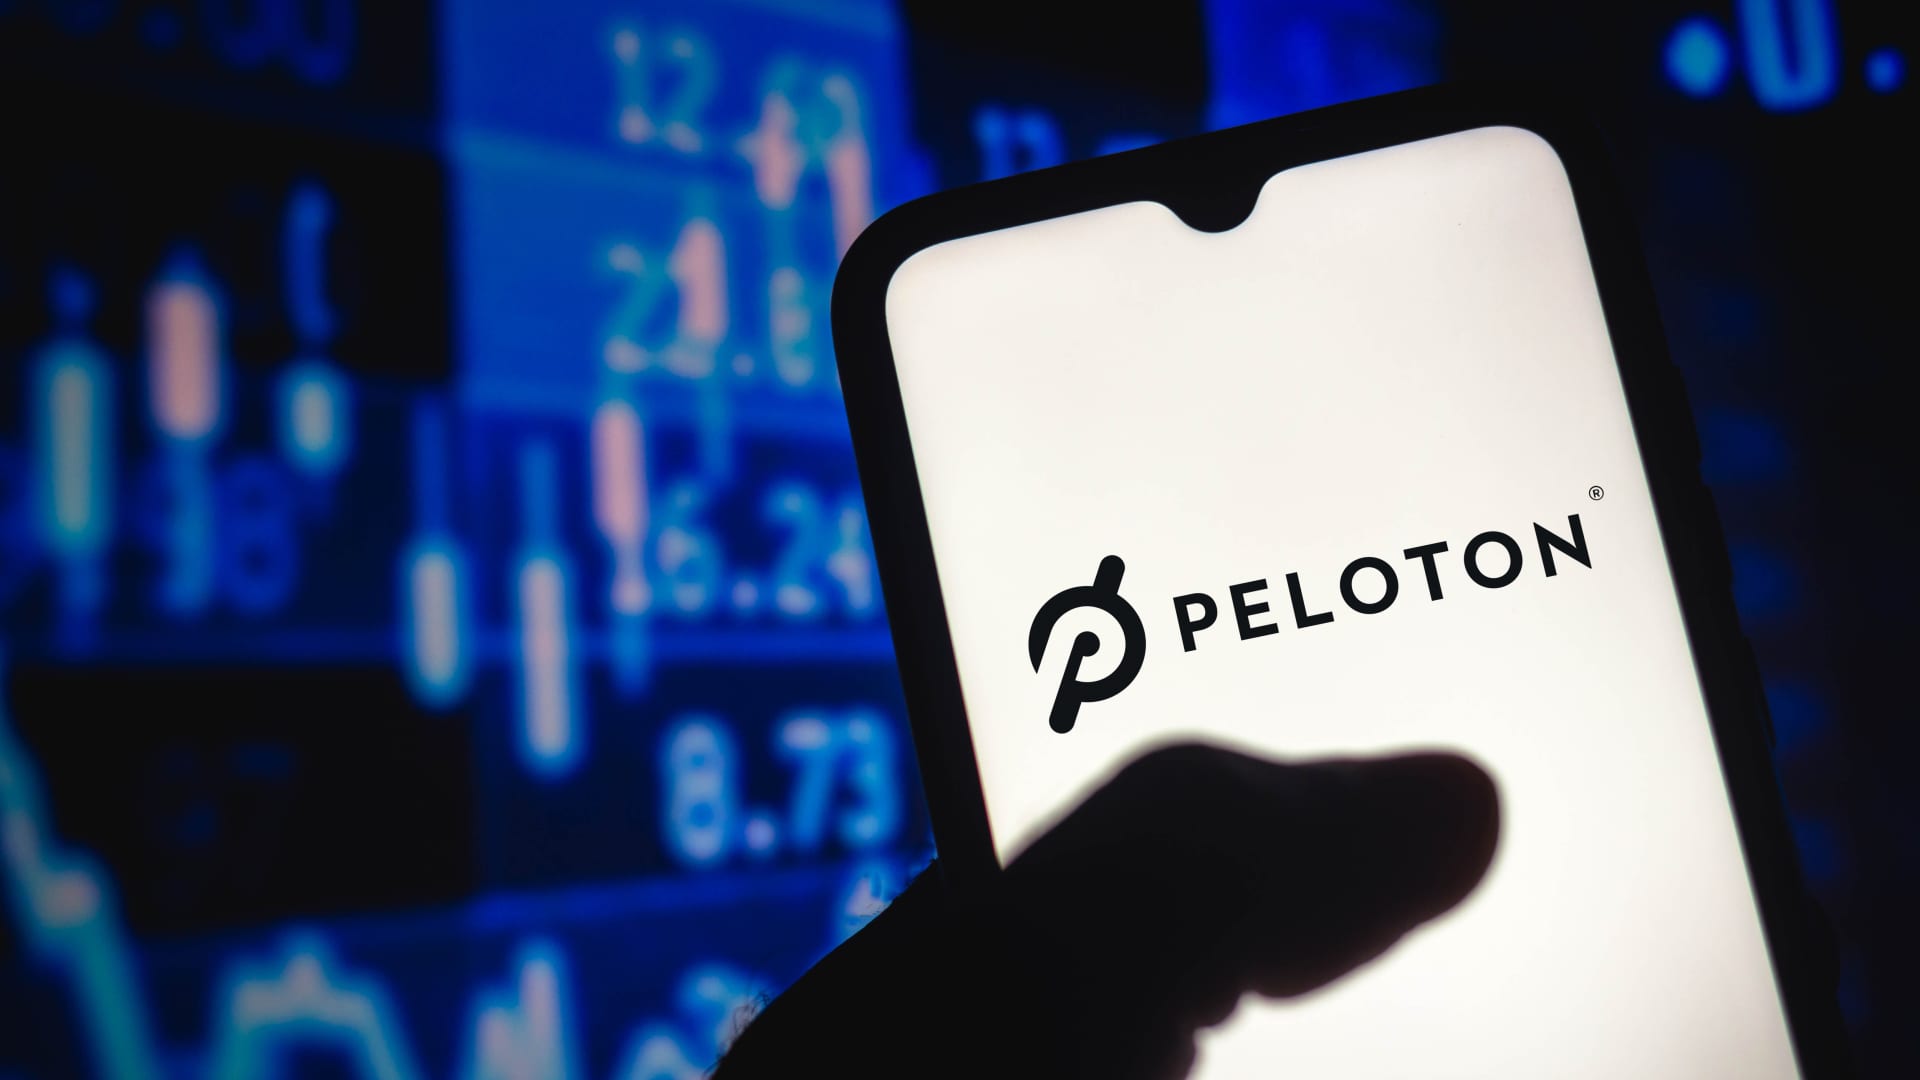 Peloton’s Chief Marketing Officer has recently left the company